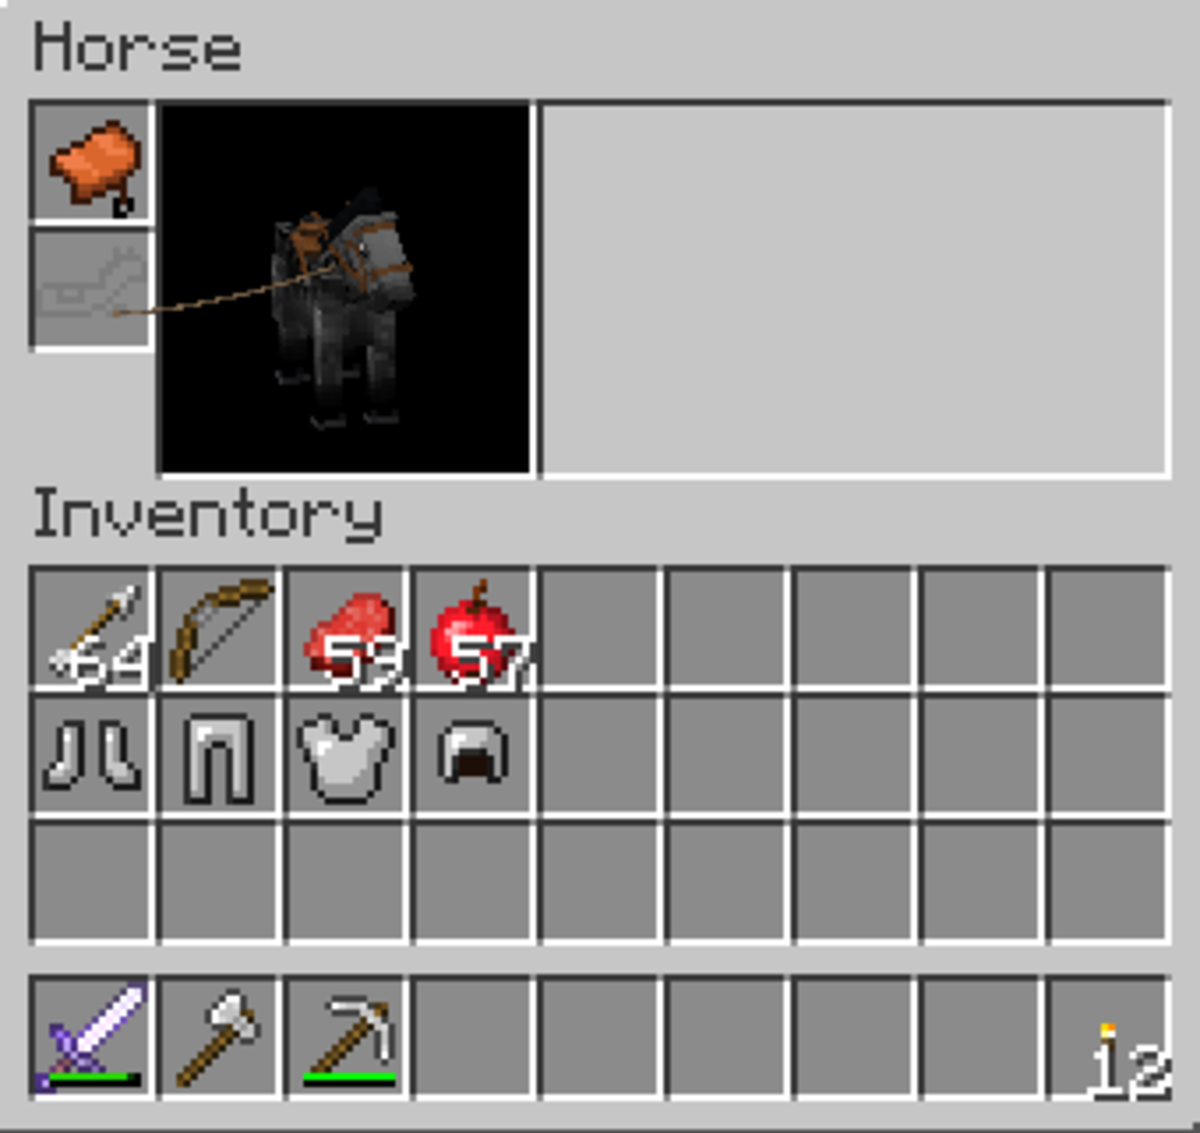 Horses can be equipped with saddles.